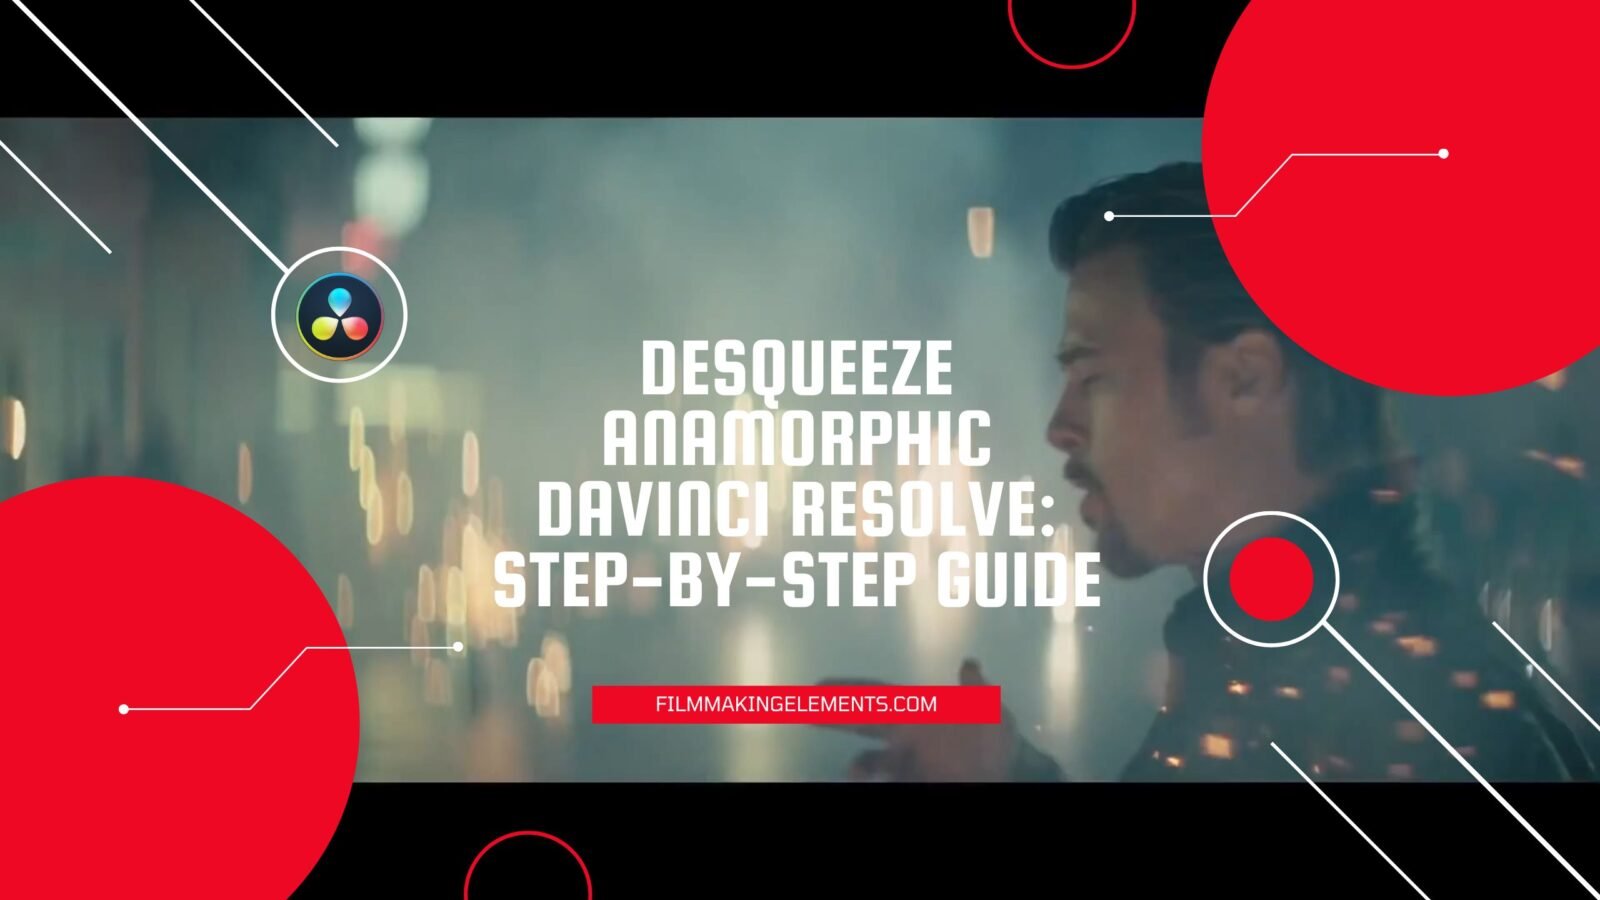 Desqueeze Anamorphic Davinci Resolve: Step-By-Step Guide